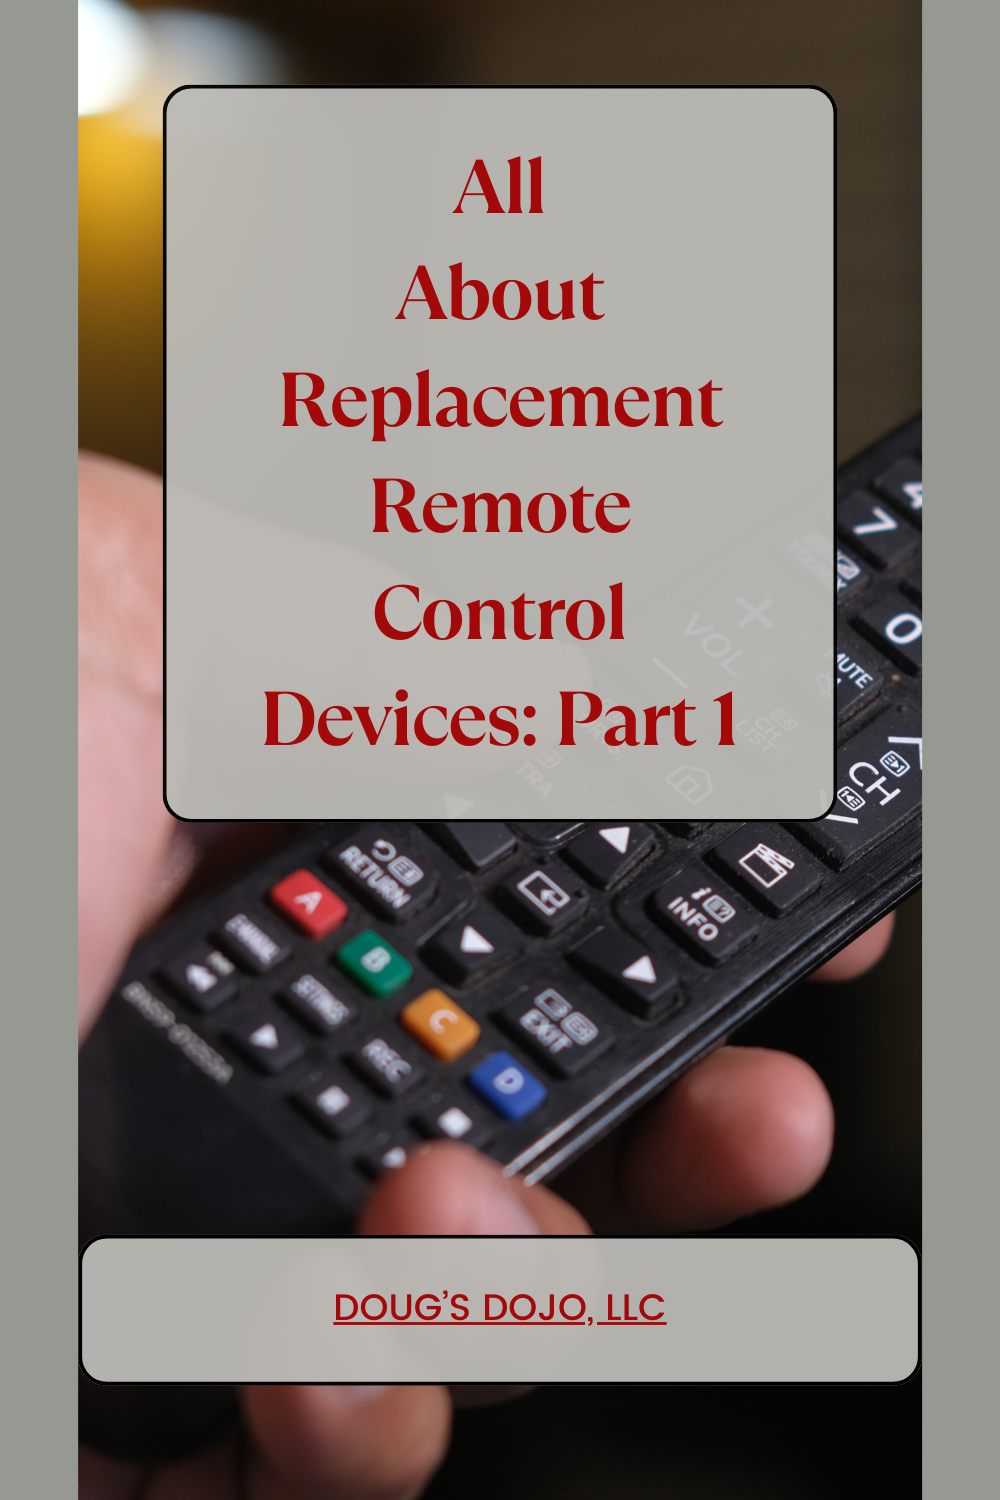 All About Replacement Remote Control Devices: Part 1